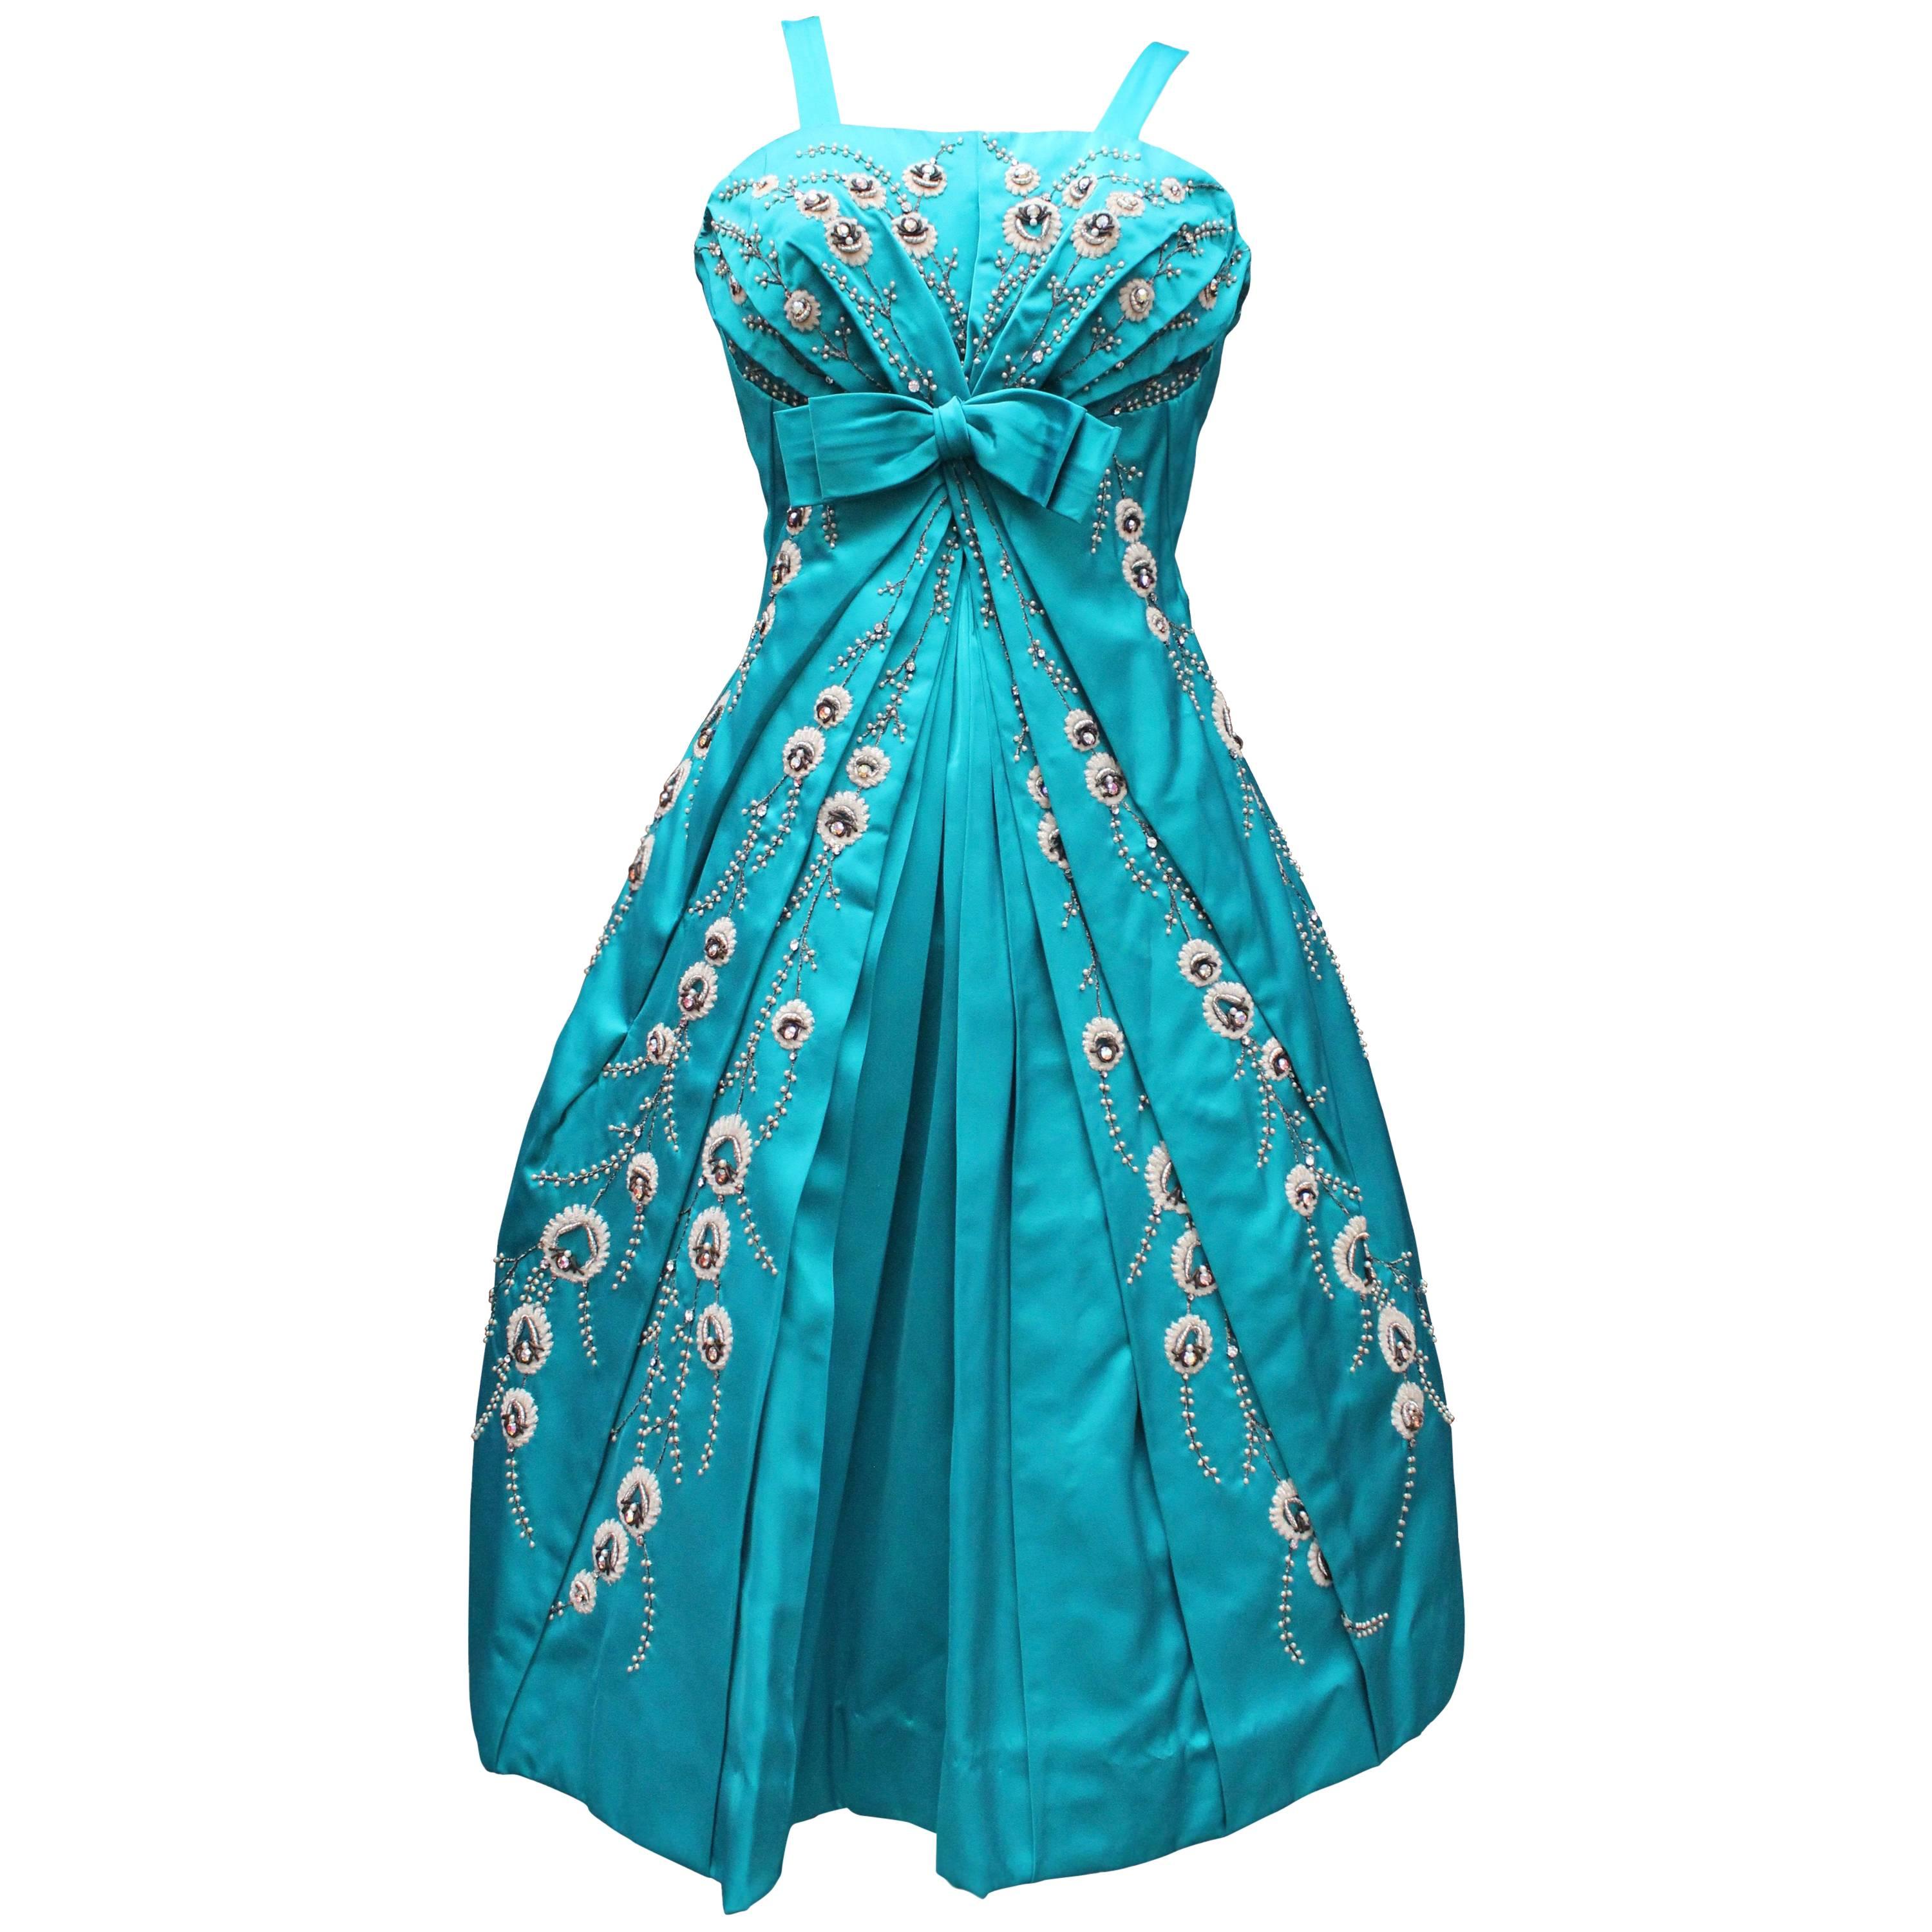 Modissa turquoise satin cocktail dress with bead embroideries For Sale